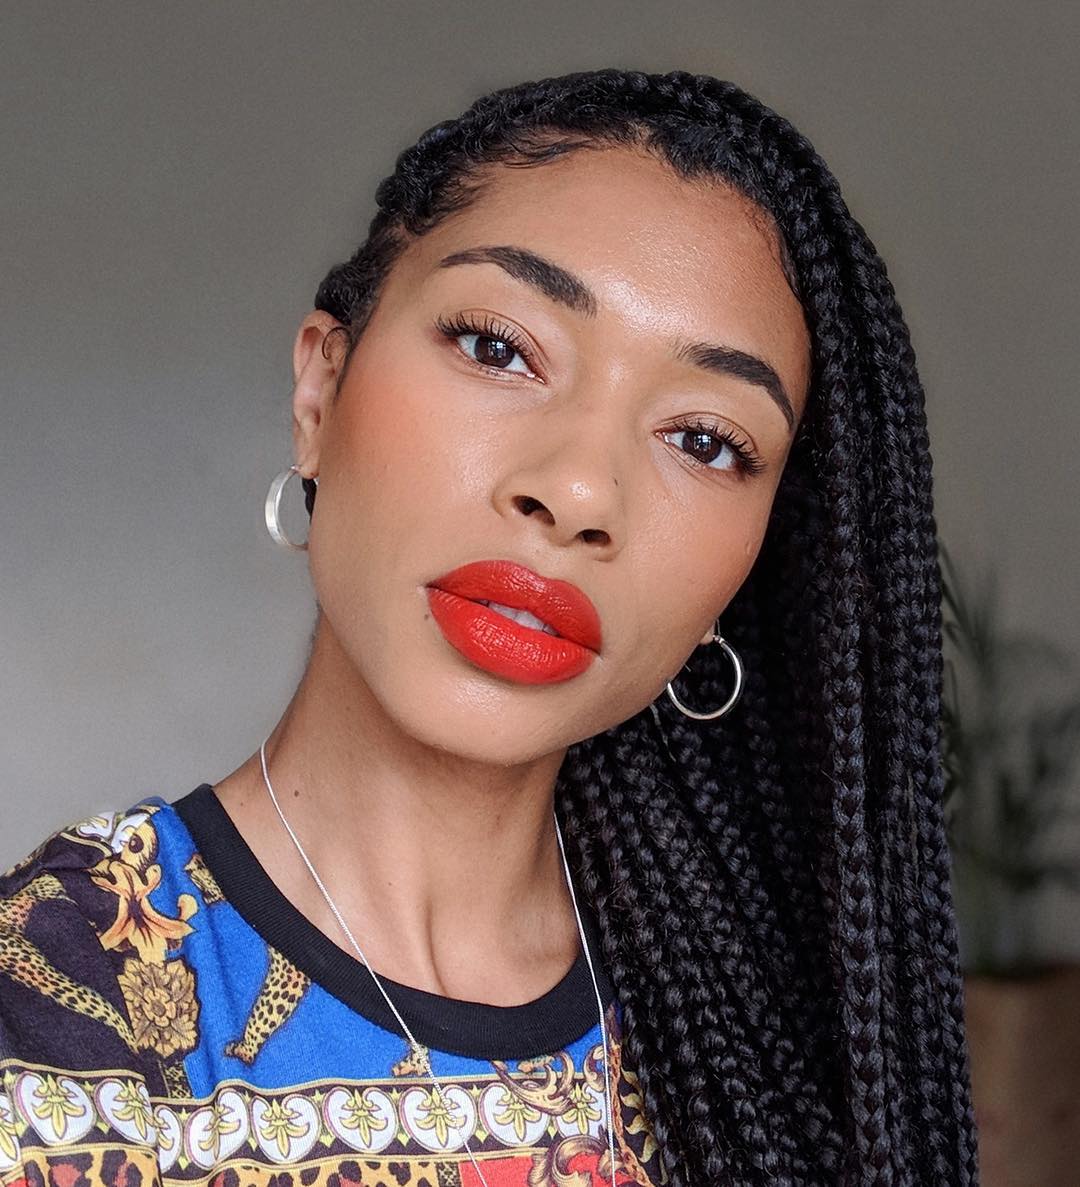 Fashion girls instagram beauty: ASOS Lesley wearing red lip and braids